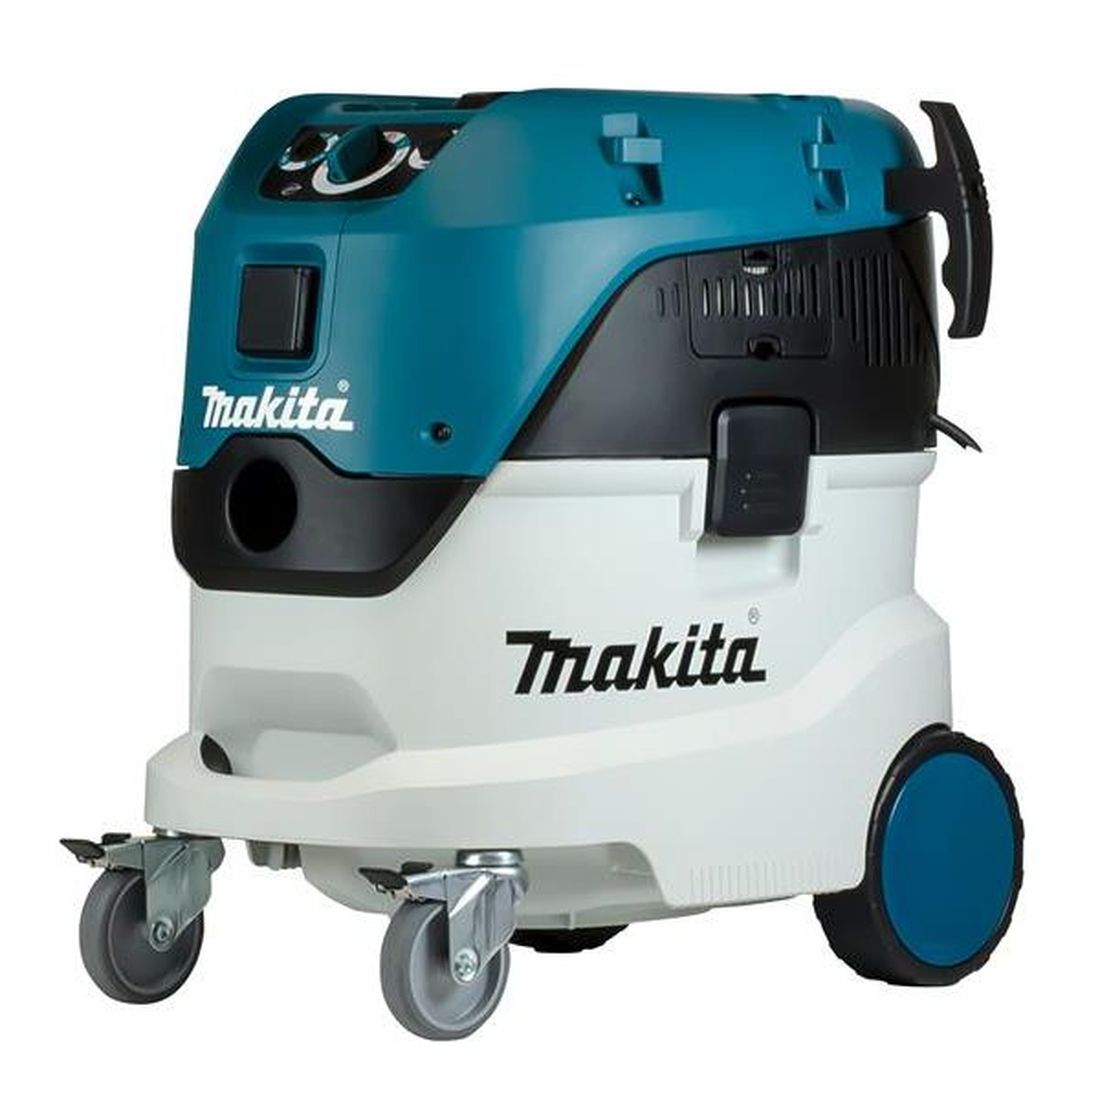 Makita VC4210MX/1 M-Class Wet & Dry Vacuum with Power Take Off 1000W 110V              